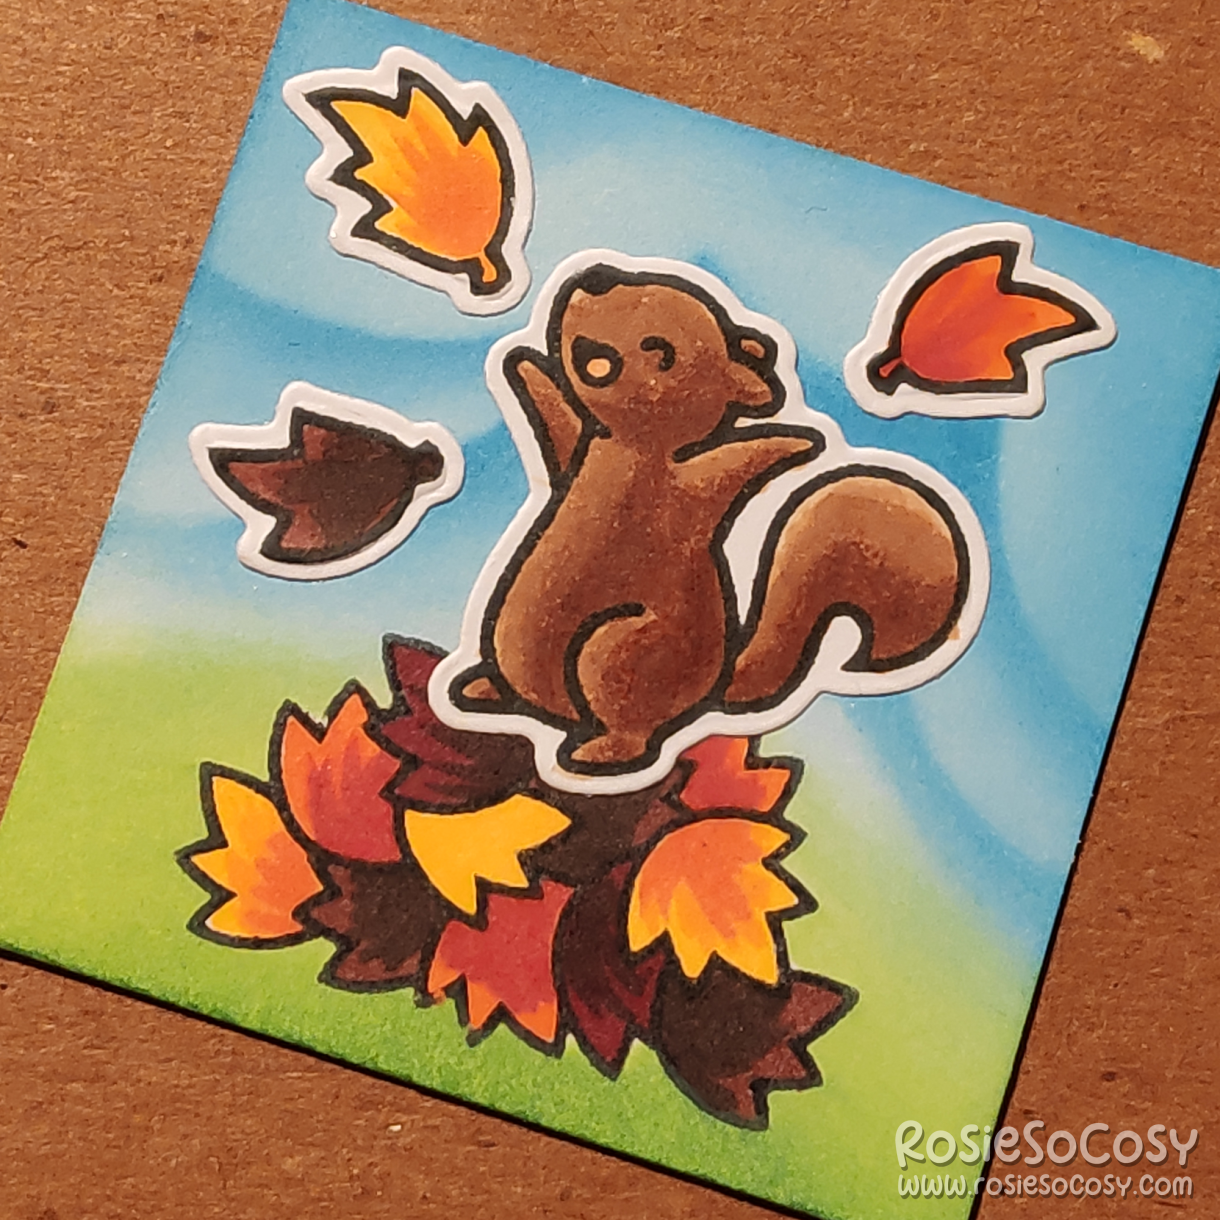 A tiny 2 inch card with a blue cloudy background, and a green grassy ground below, there is a overtly happy brown squirrel dancing atop a big pile of leaves, with a few of those leaves flying around.